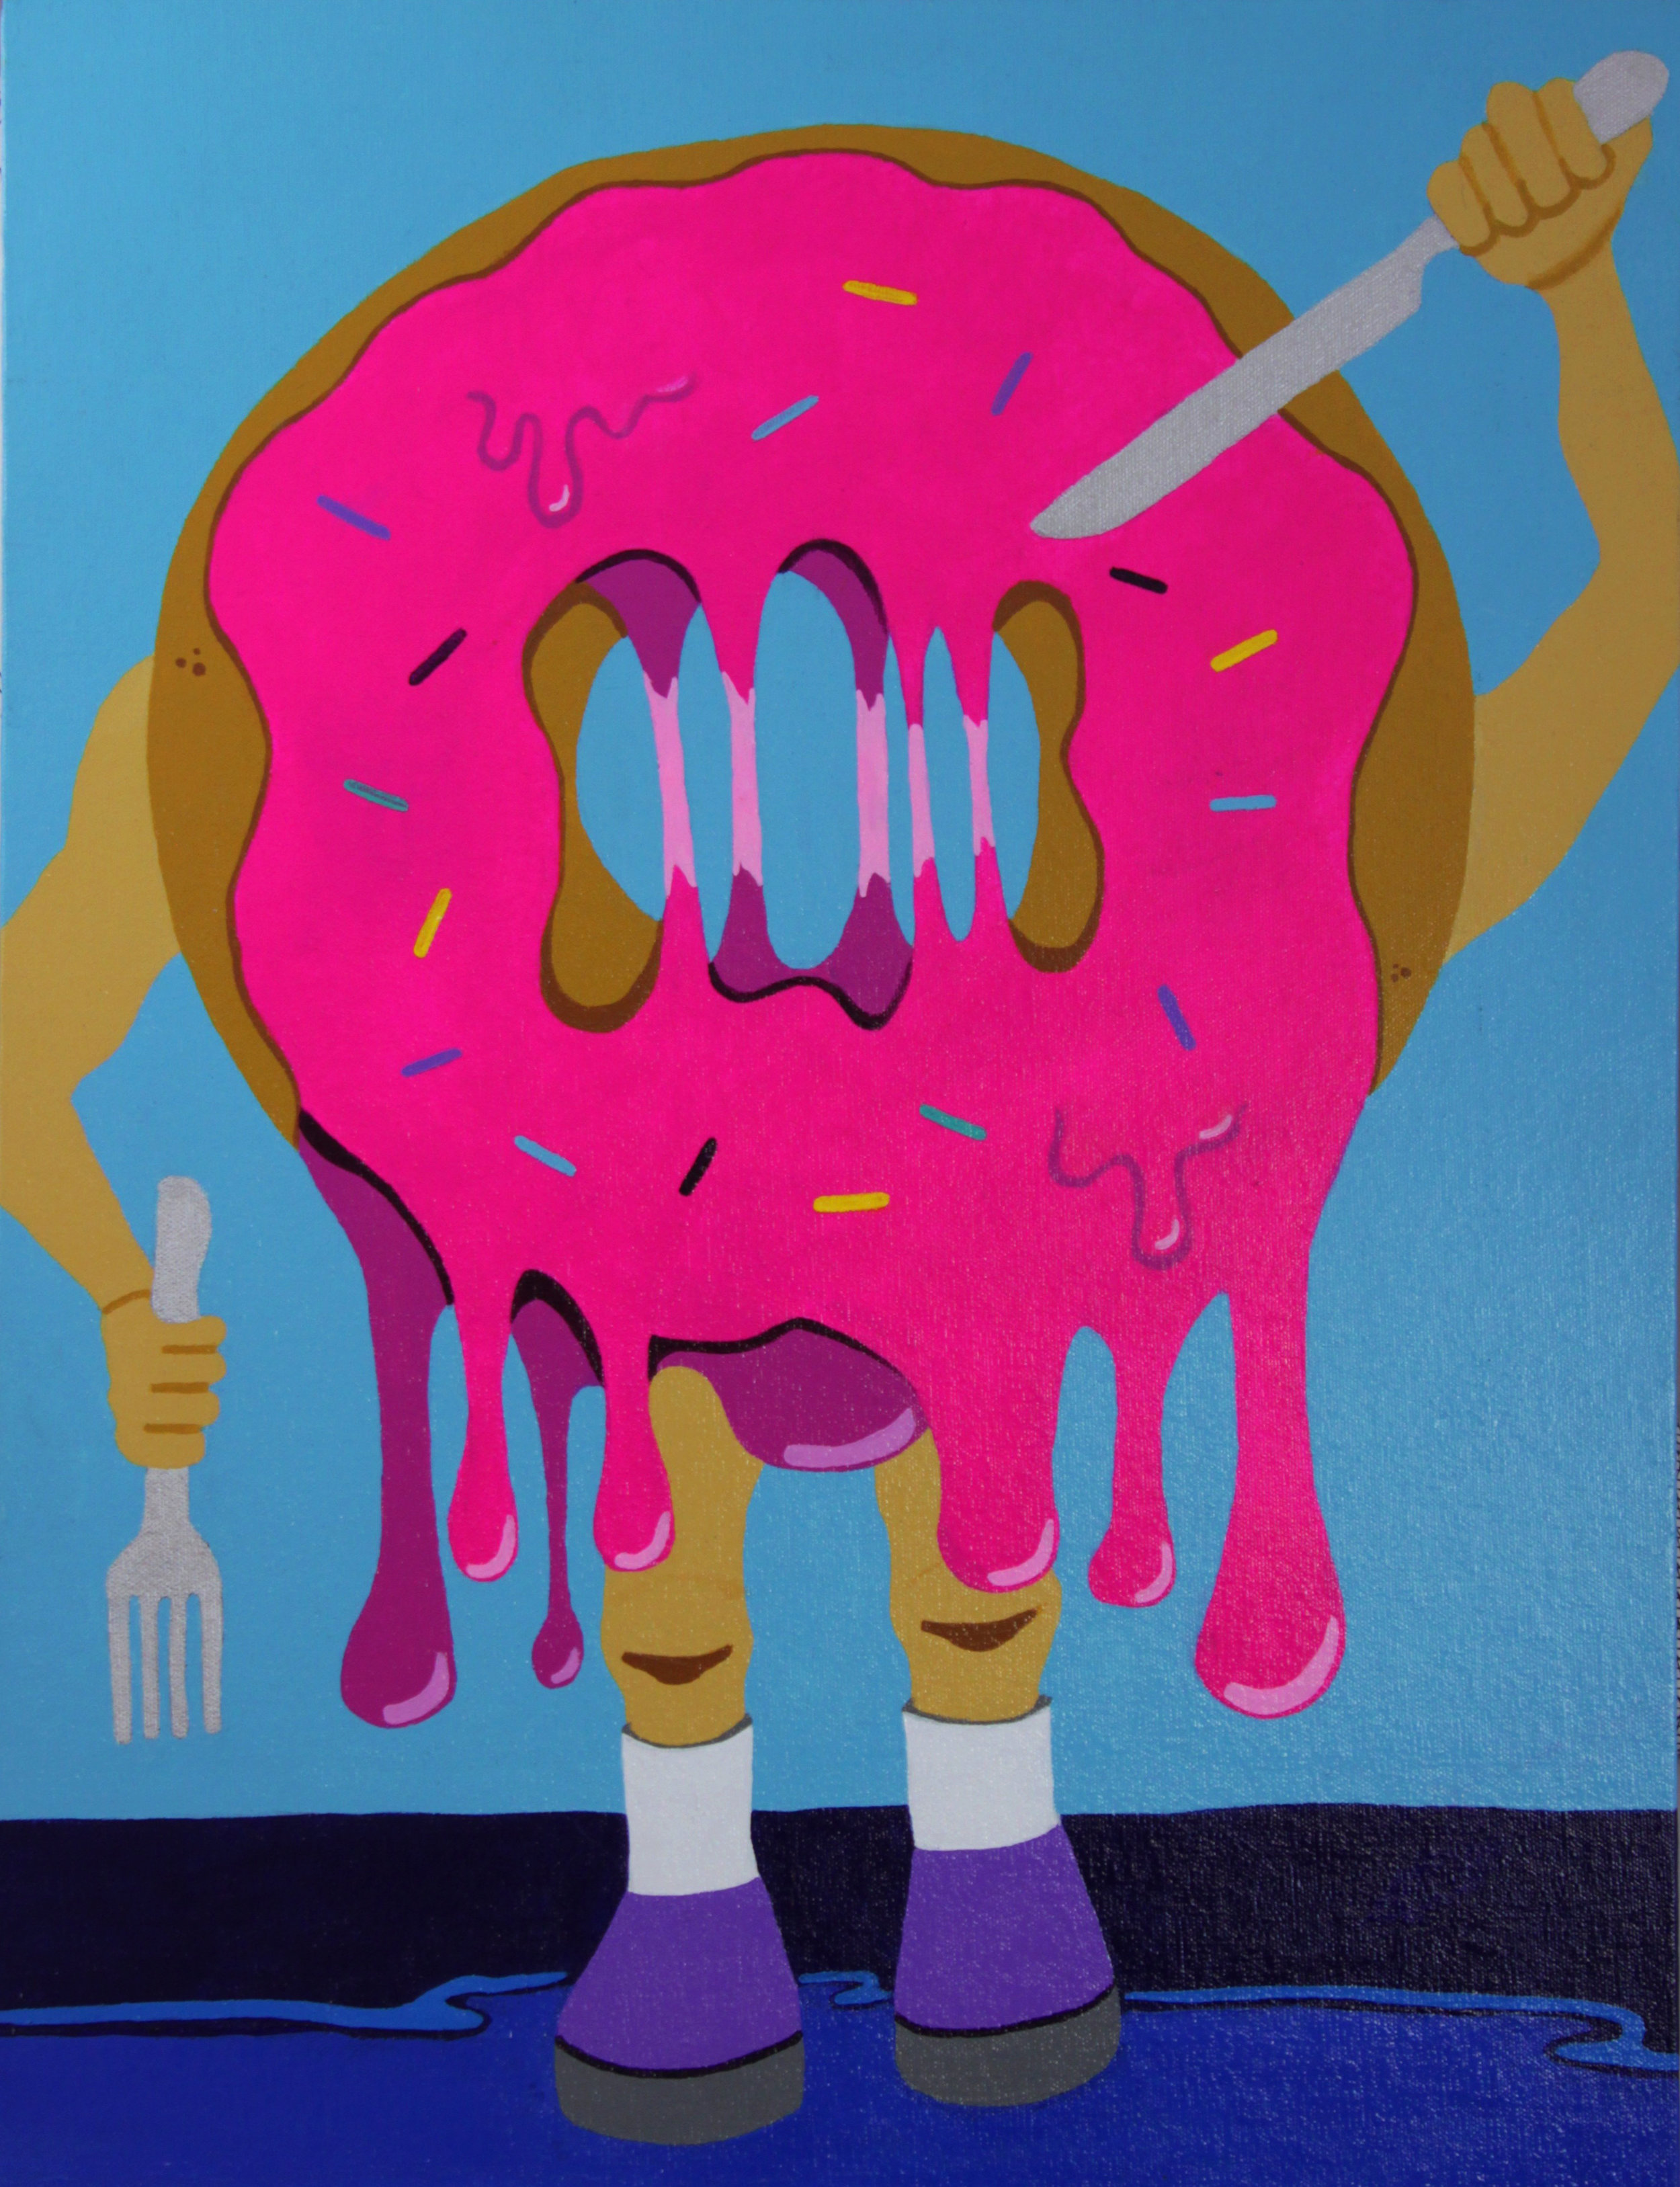   The Revenge of the Donut , 2015  Acrylic on Canvas  18” x 24” 